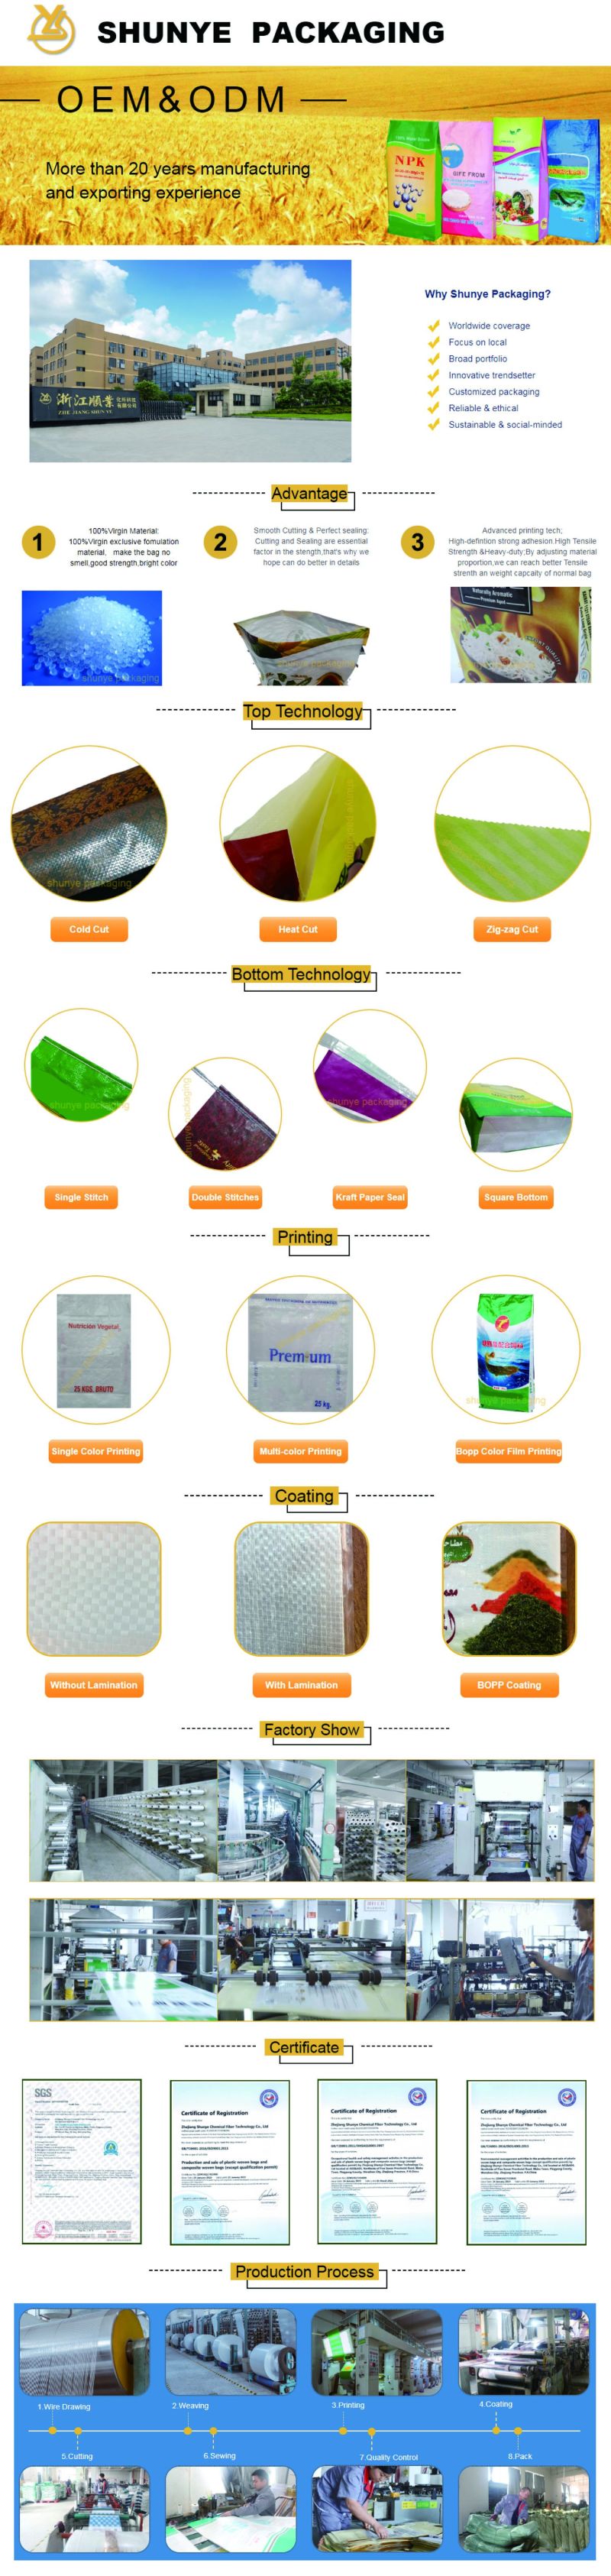 New Material Plastic Packaging Bag / Sack for Rice, Fertilizer, Cement